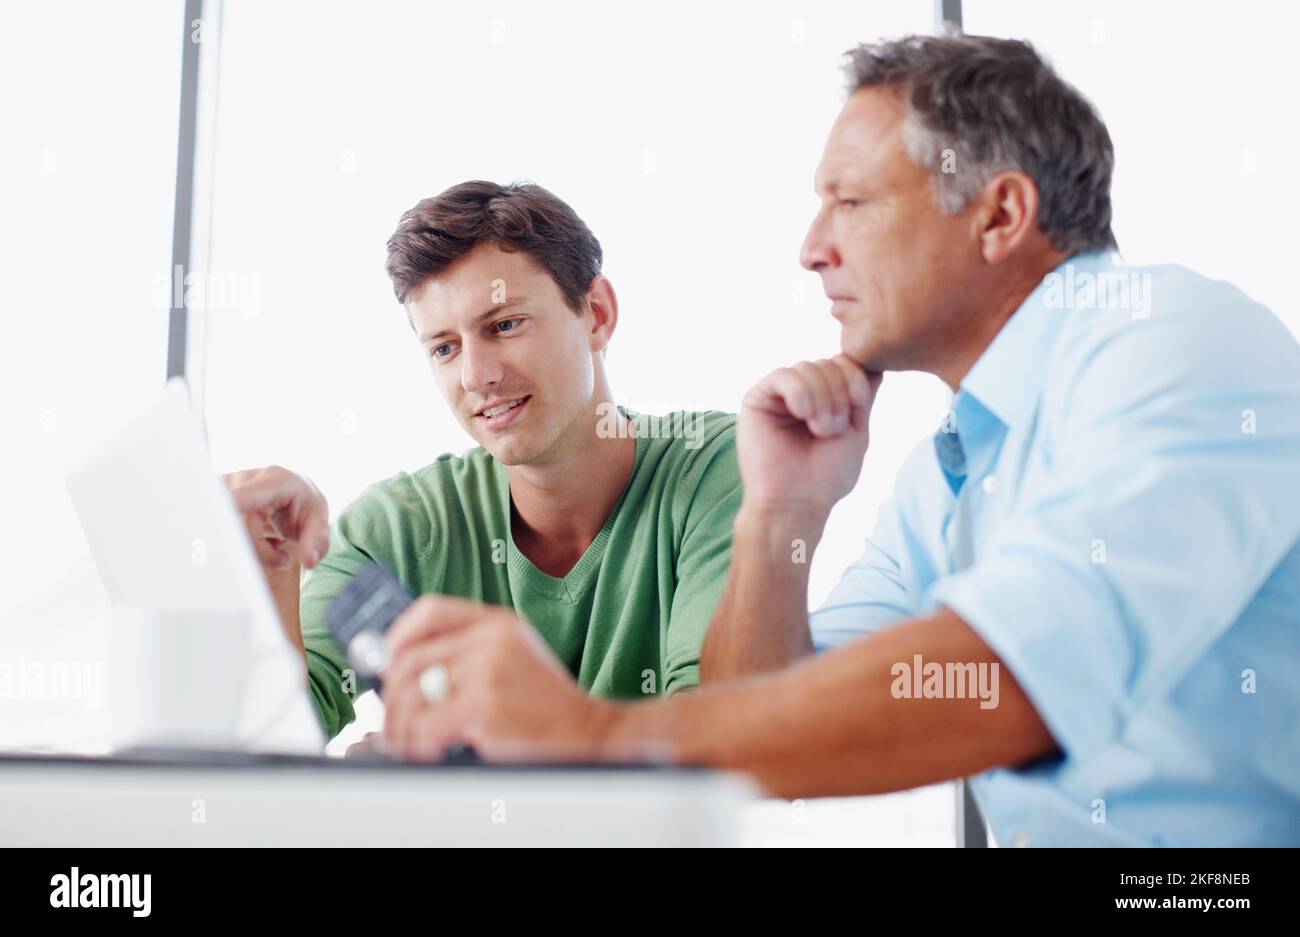 Gaining valuable work experience. A mature executive looking over some work on a laptop with a younger colleague. Stock Photo